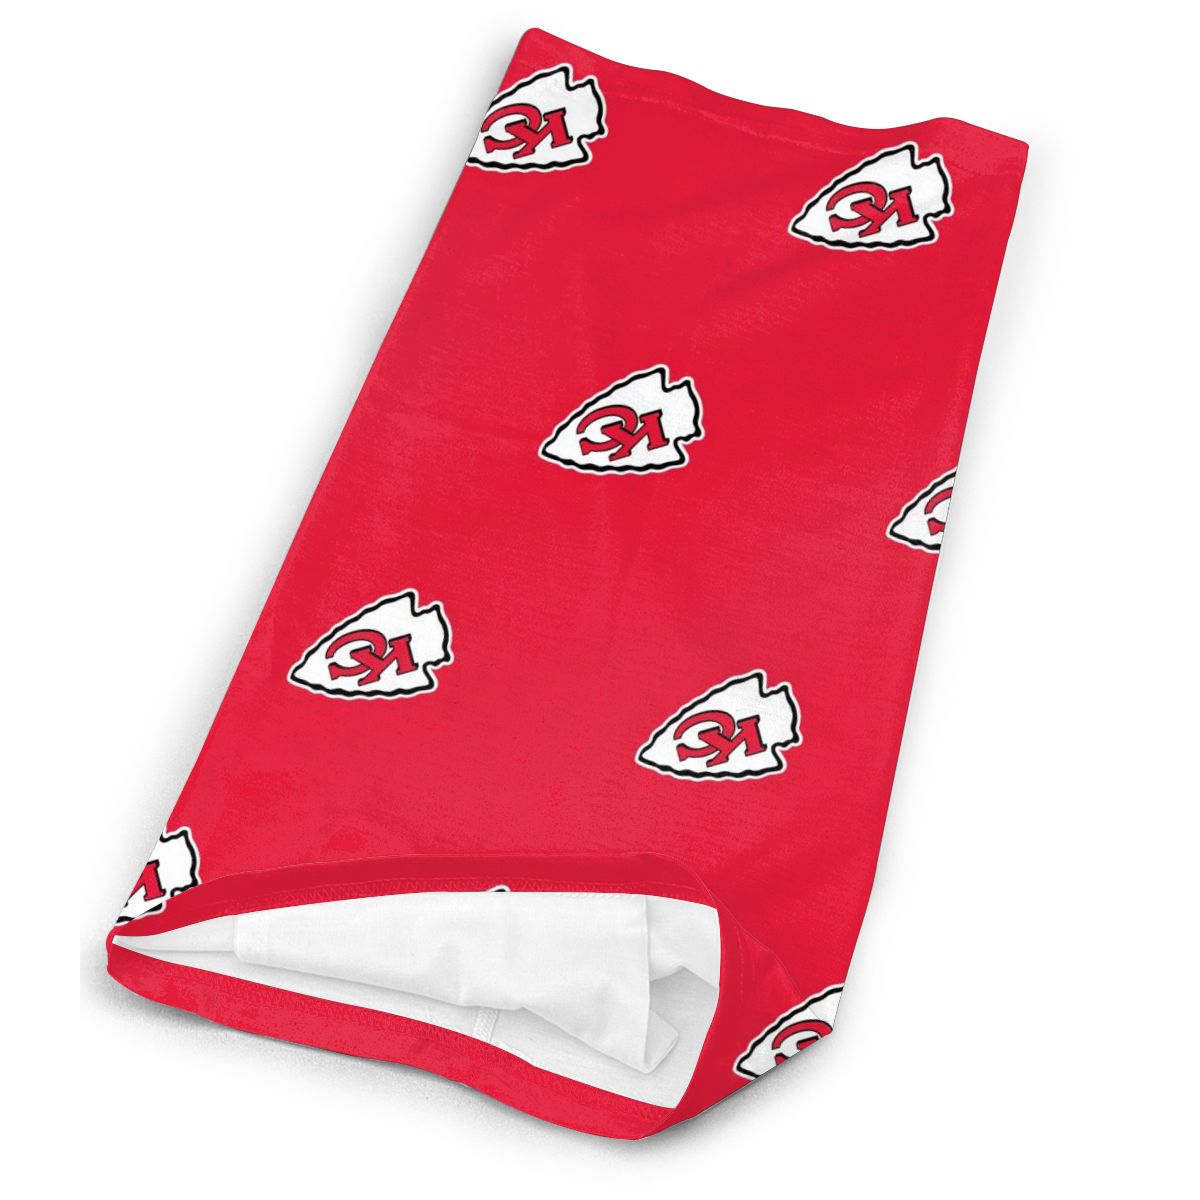 Reusble Mouth Cover Bandanas Kansas City Chiefs Variety Head Scarf Face Mask With PM 2.5 Filter